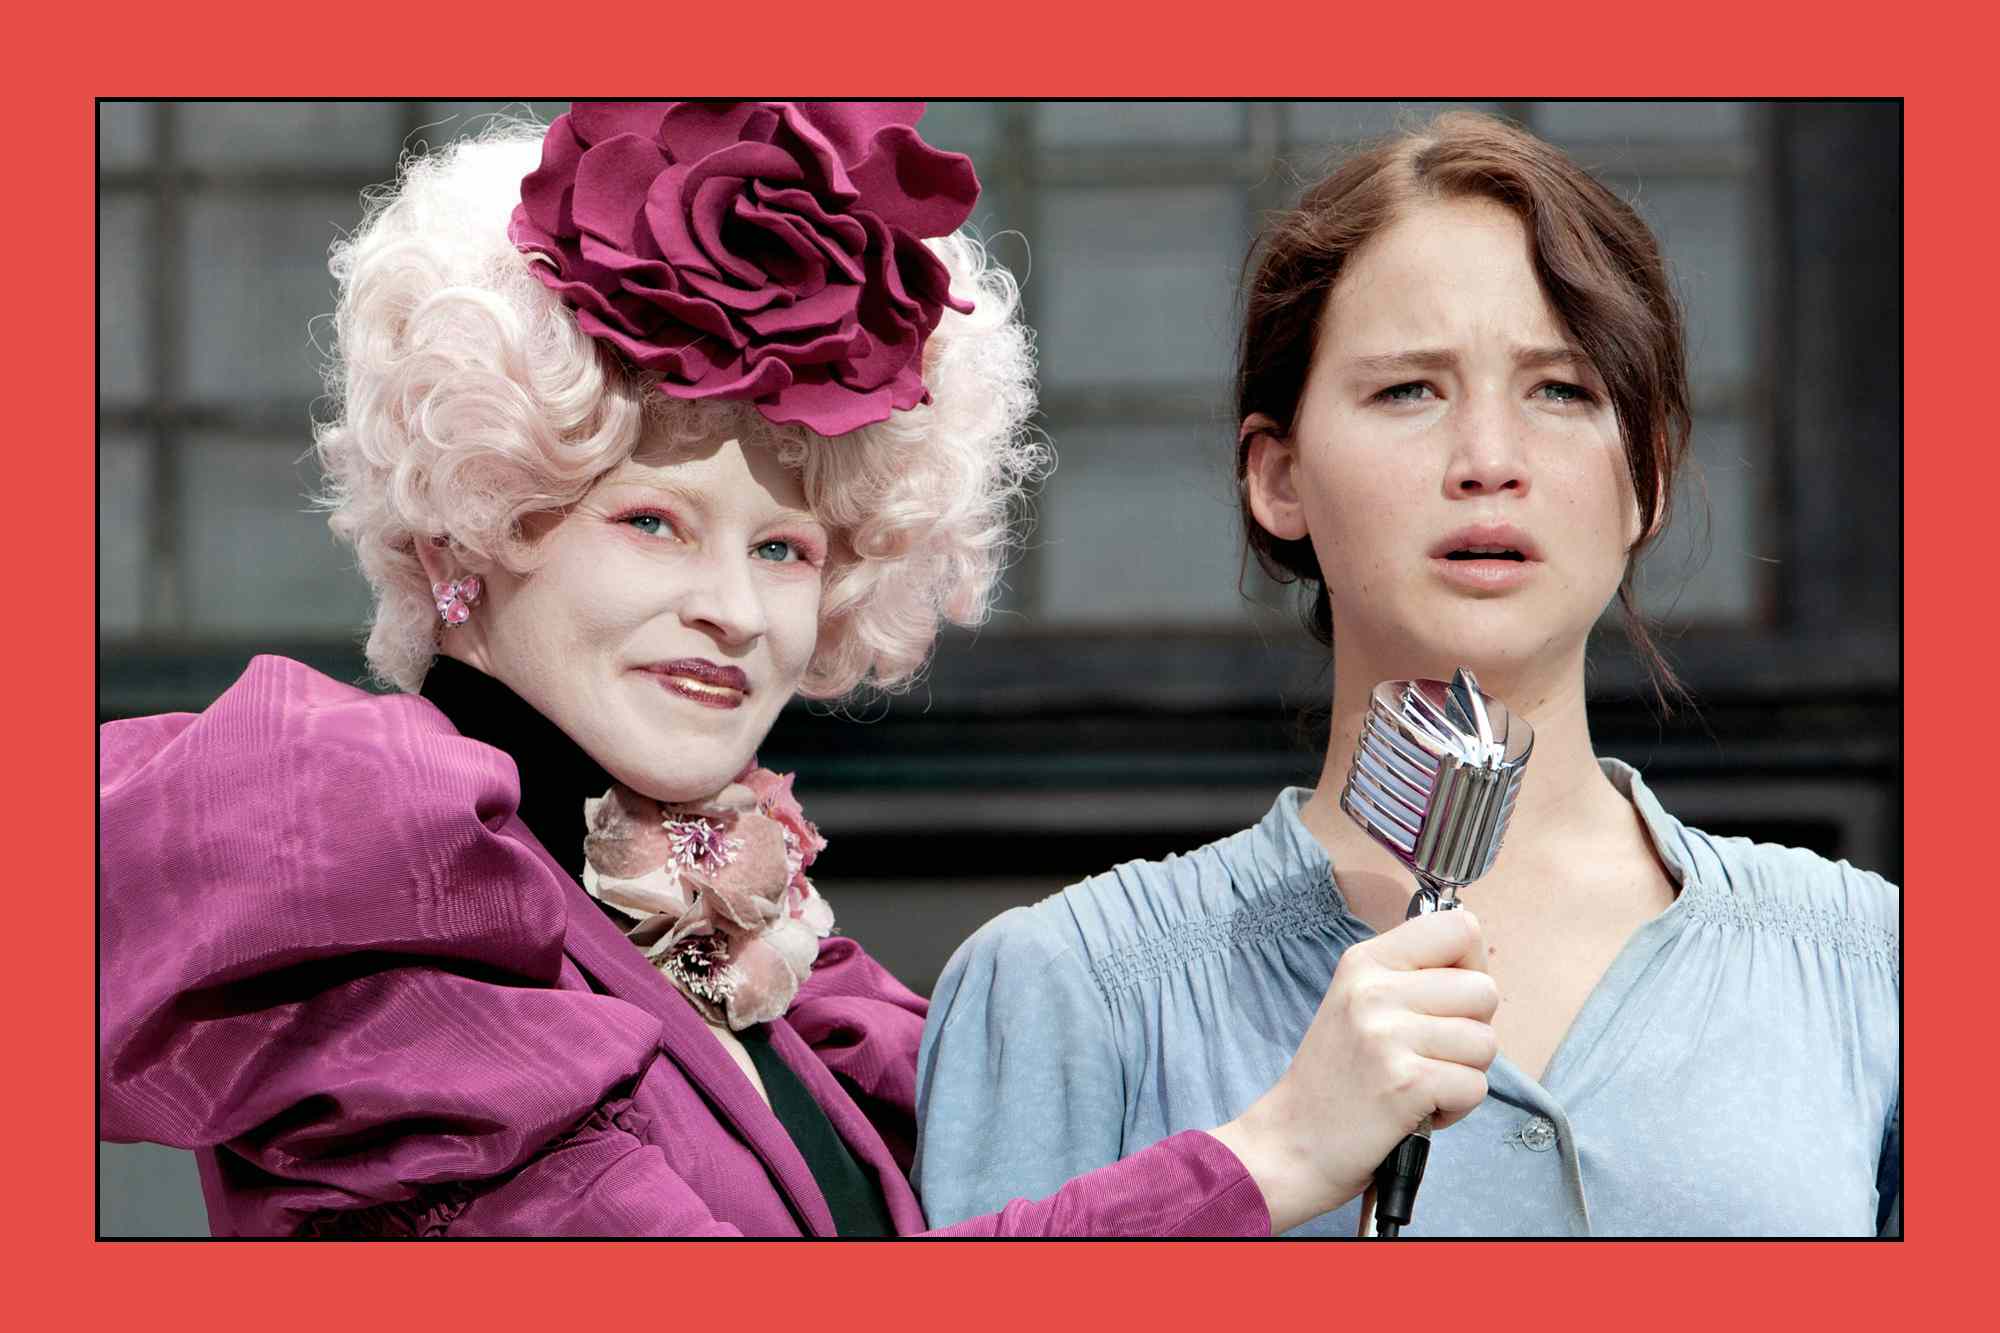 “The Hunger Games” cast: See where Jennifer Lawrence, Josh Hutcherson, and more actors are now